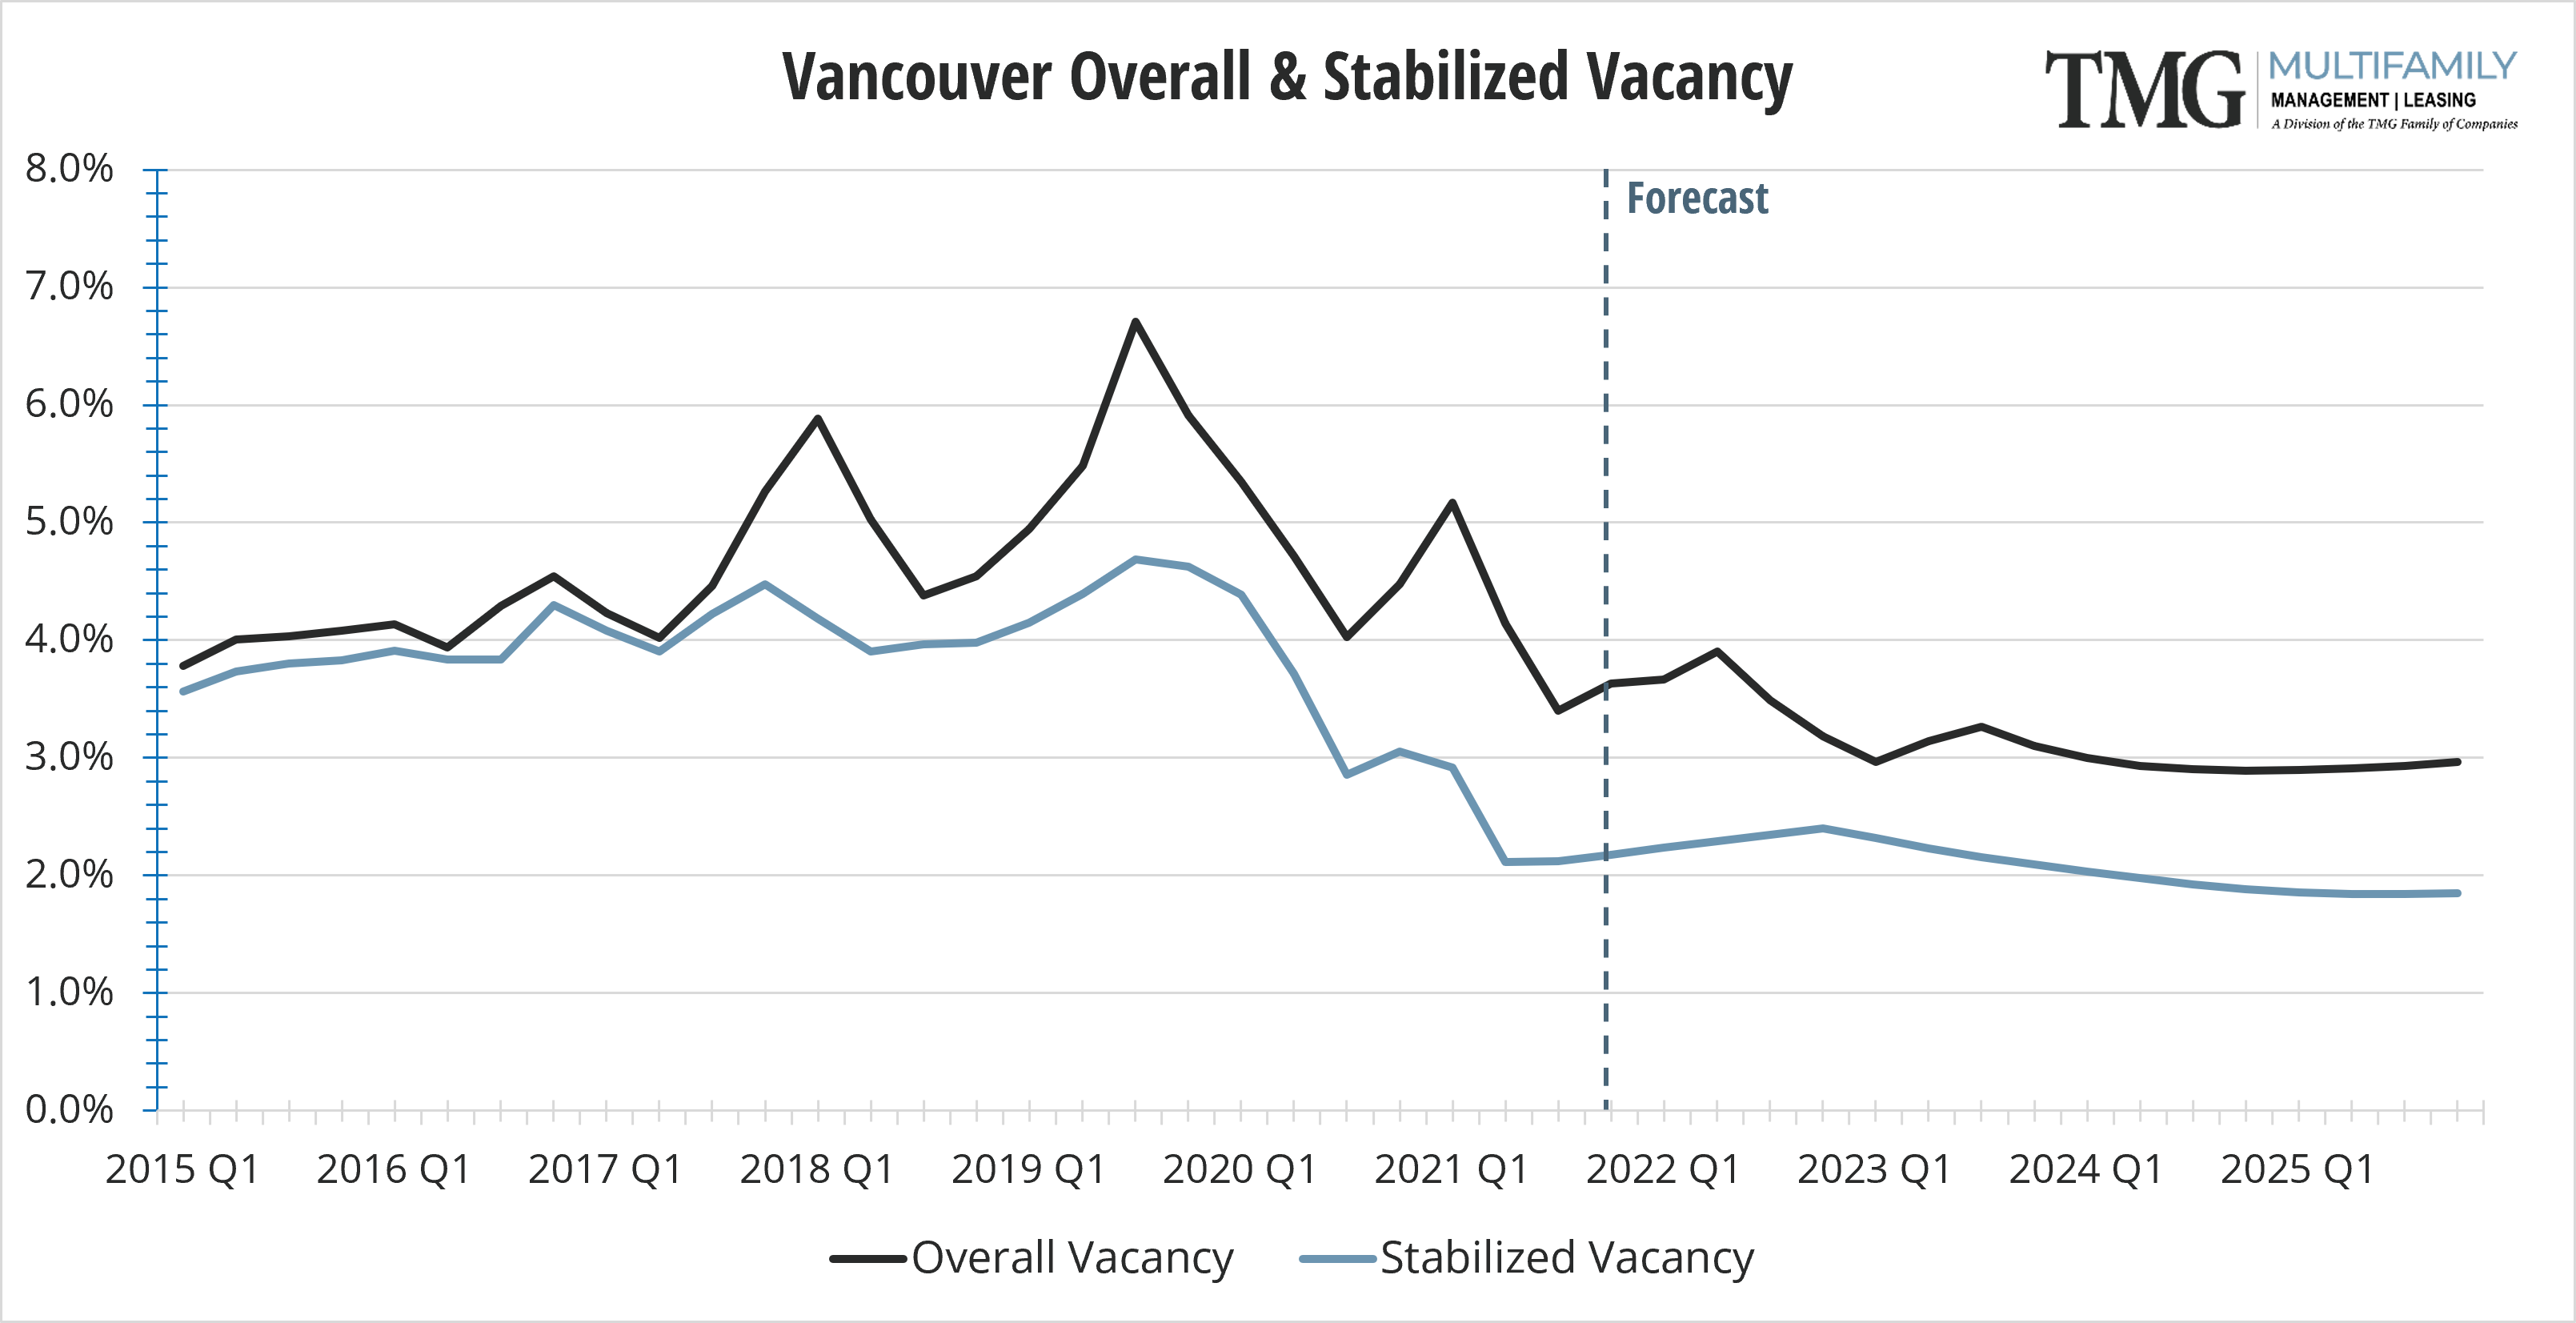 Vancouver Q4 Overall and Stabilized Vacancy